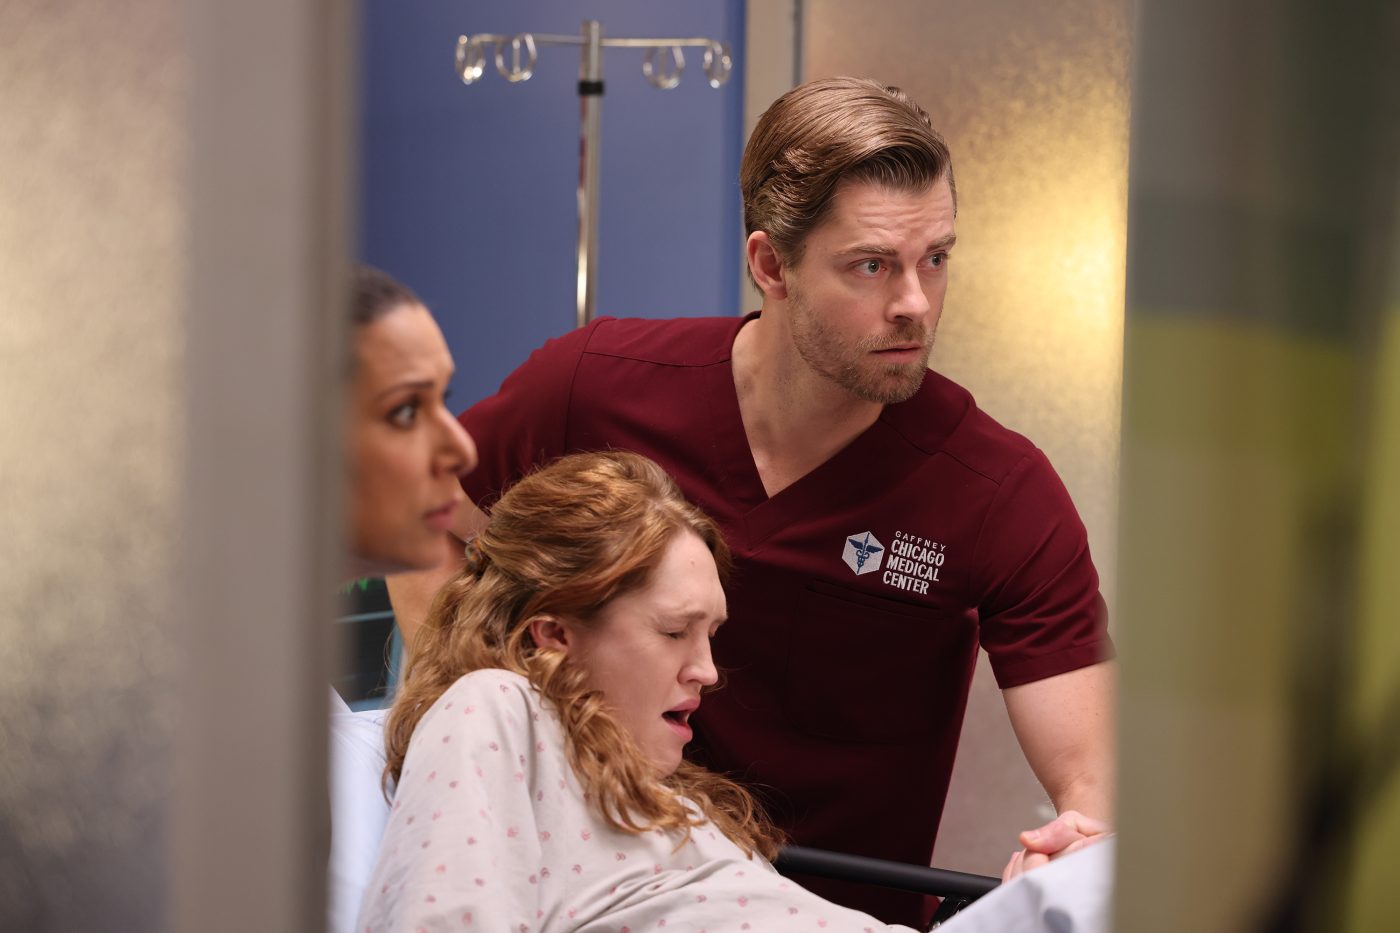 Dr. Mitch Ripley helps a patient in Chicago Med